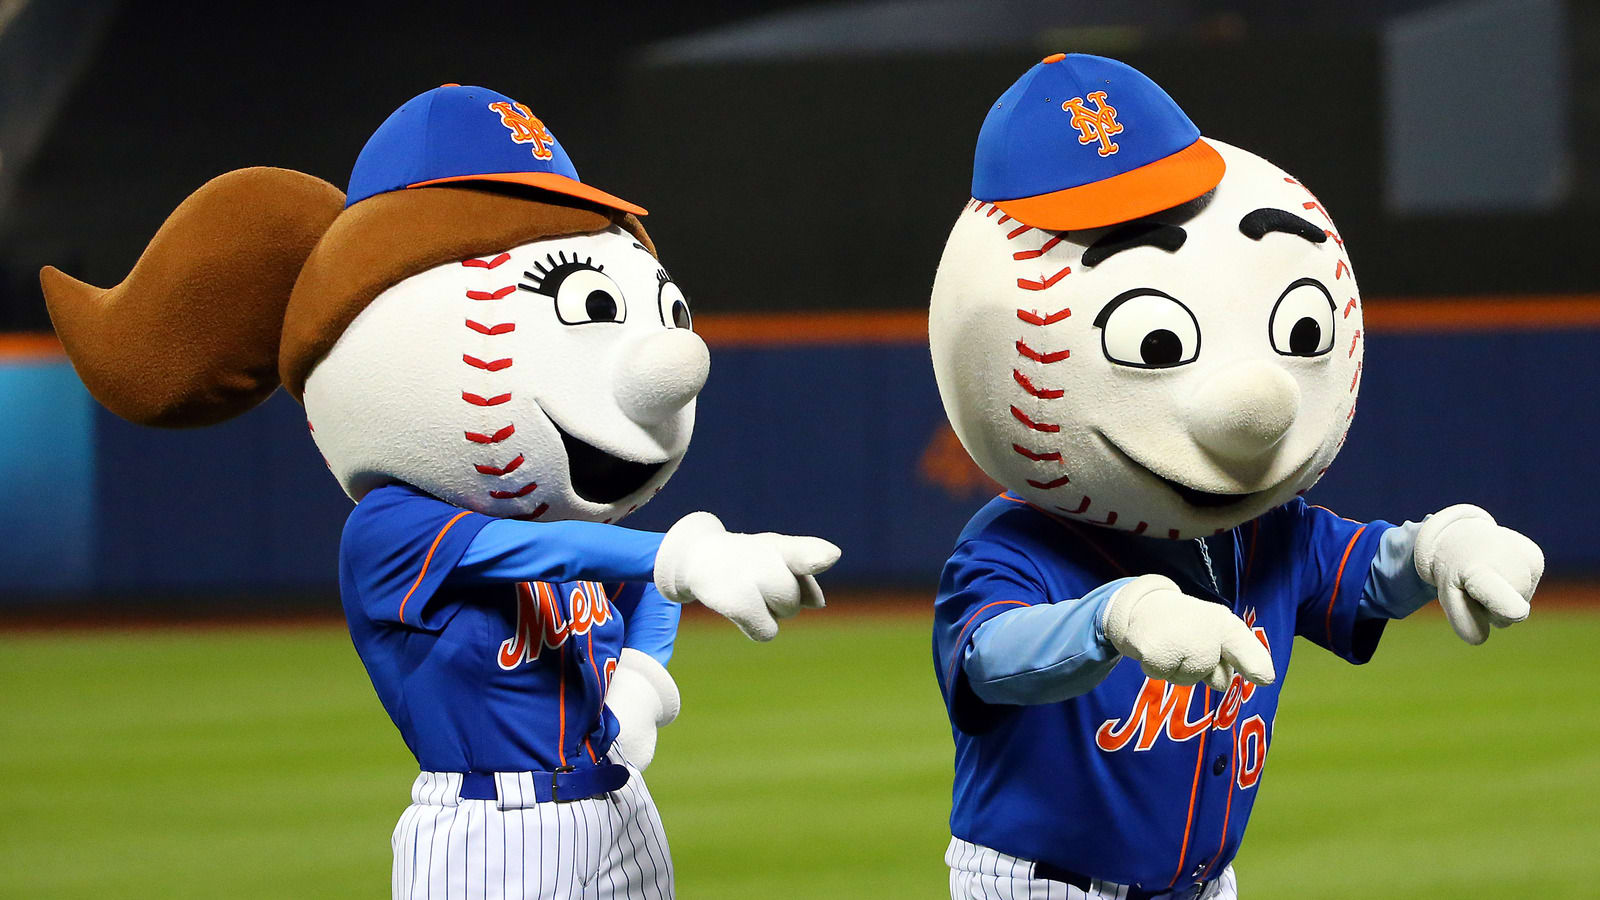 Mr Met gives fan the finger, employee out as team mascot, Sports